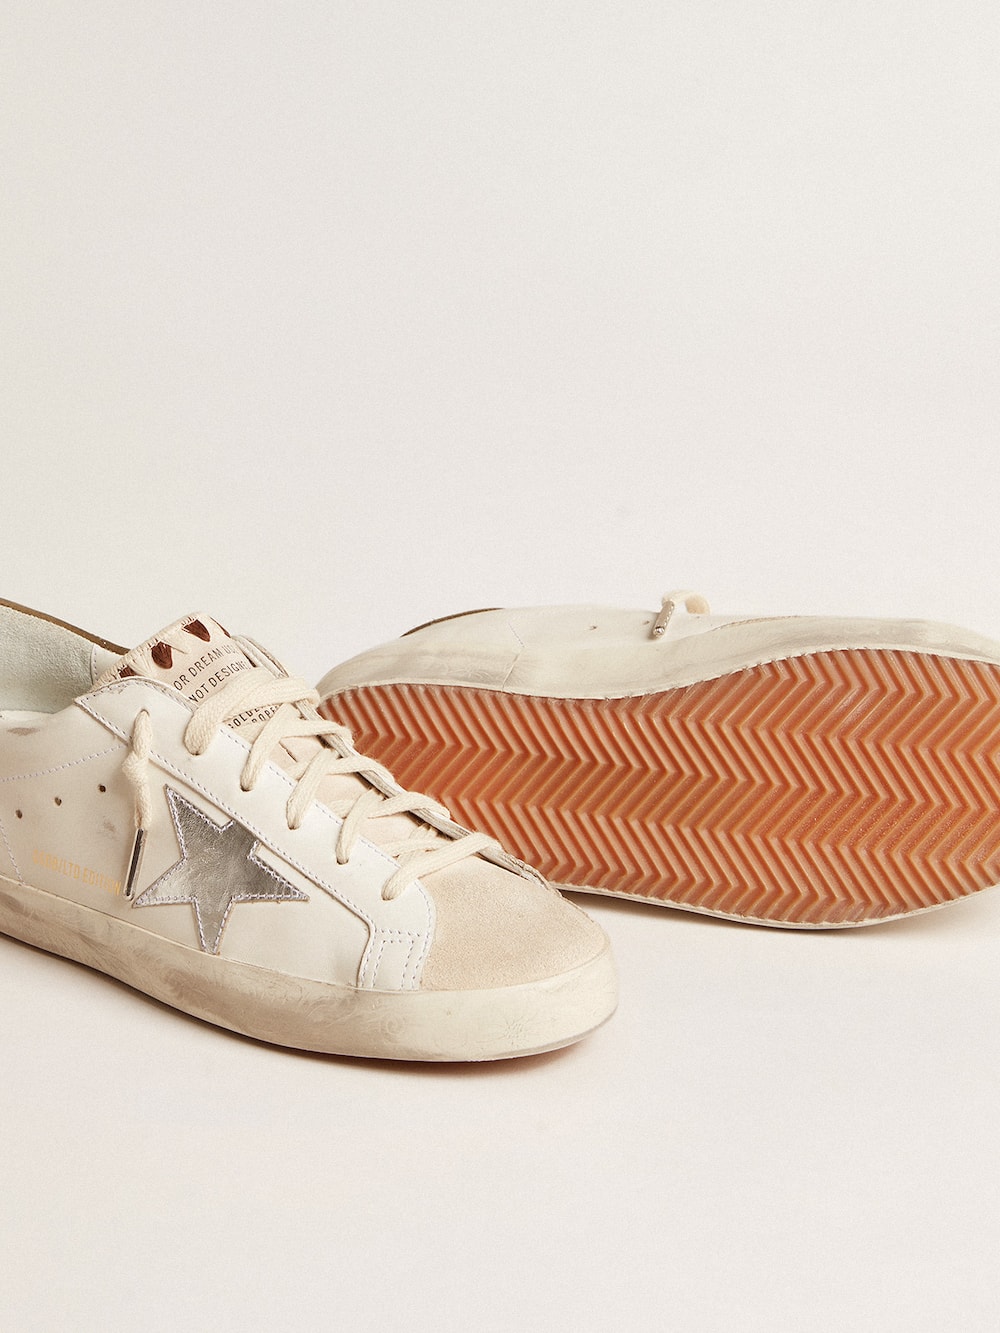 Golden Goose - Super-Star LTD with metallic silver leather star and brown heel tab in 